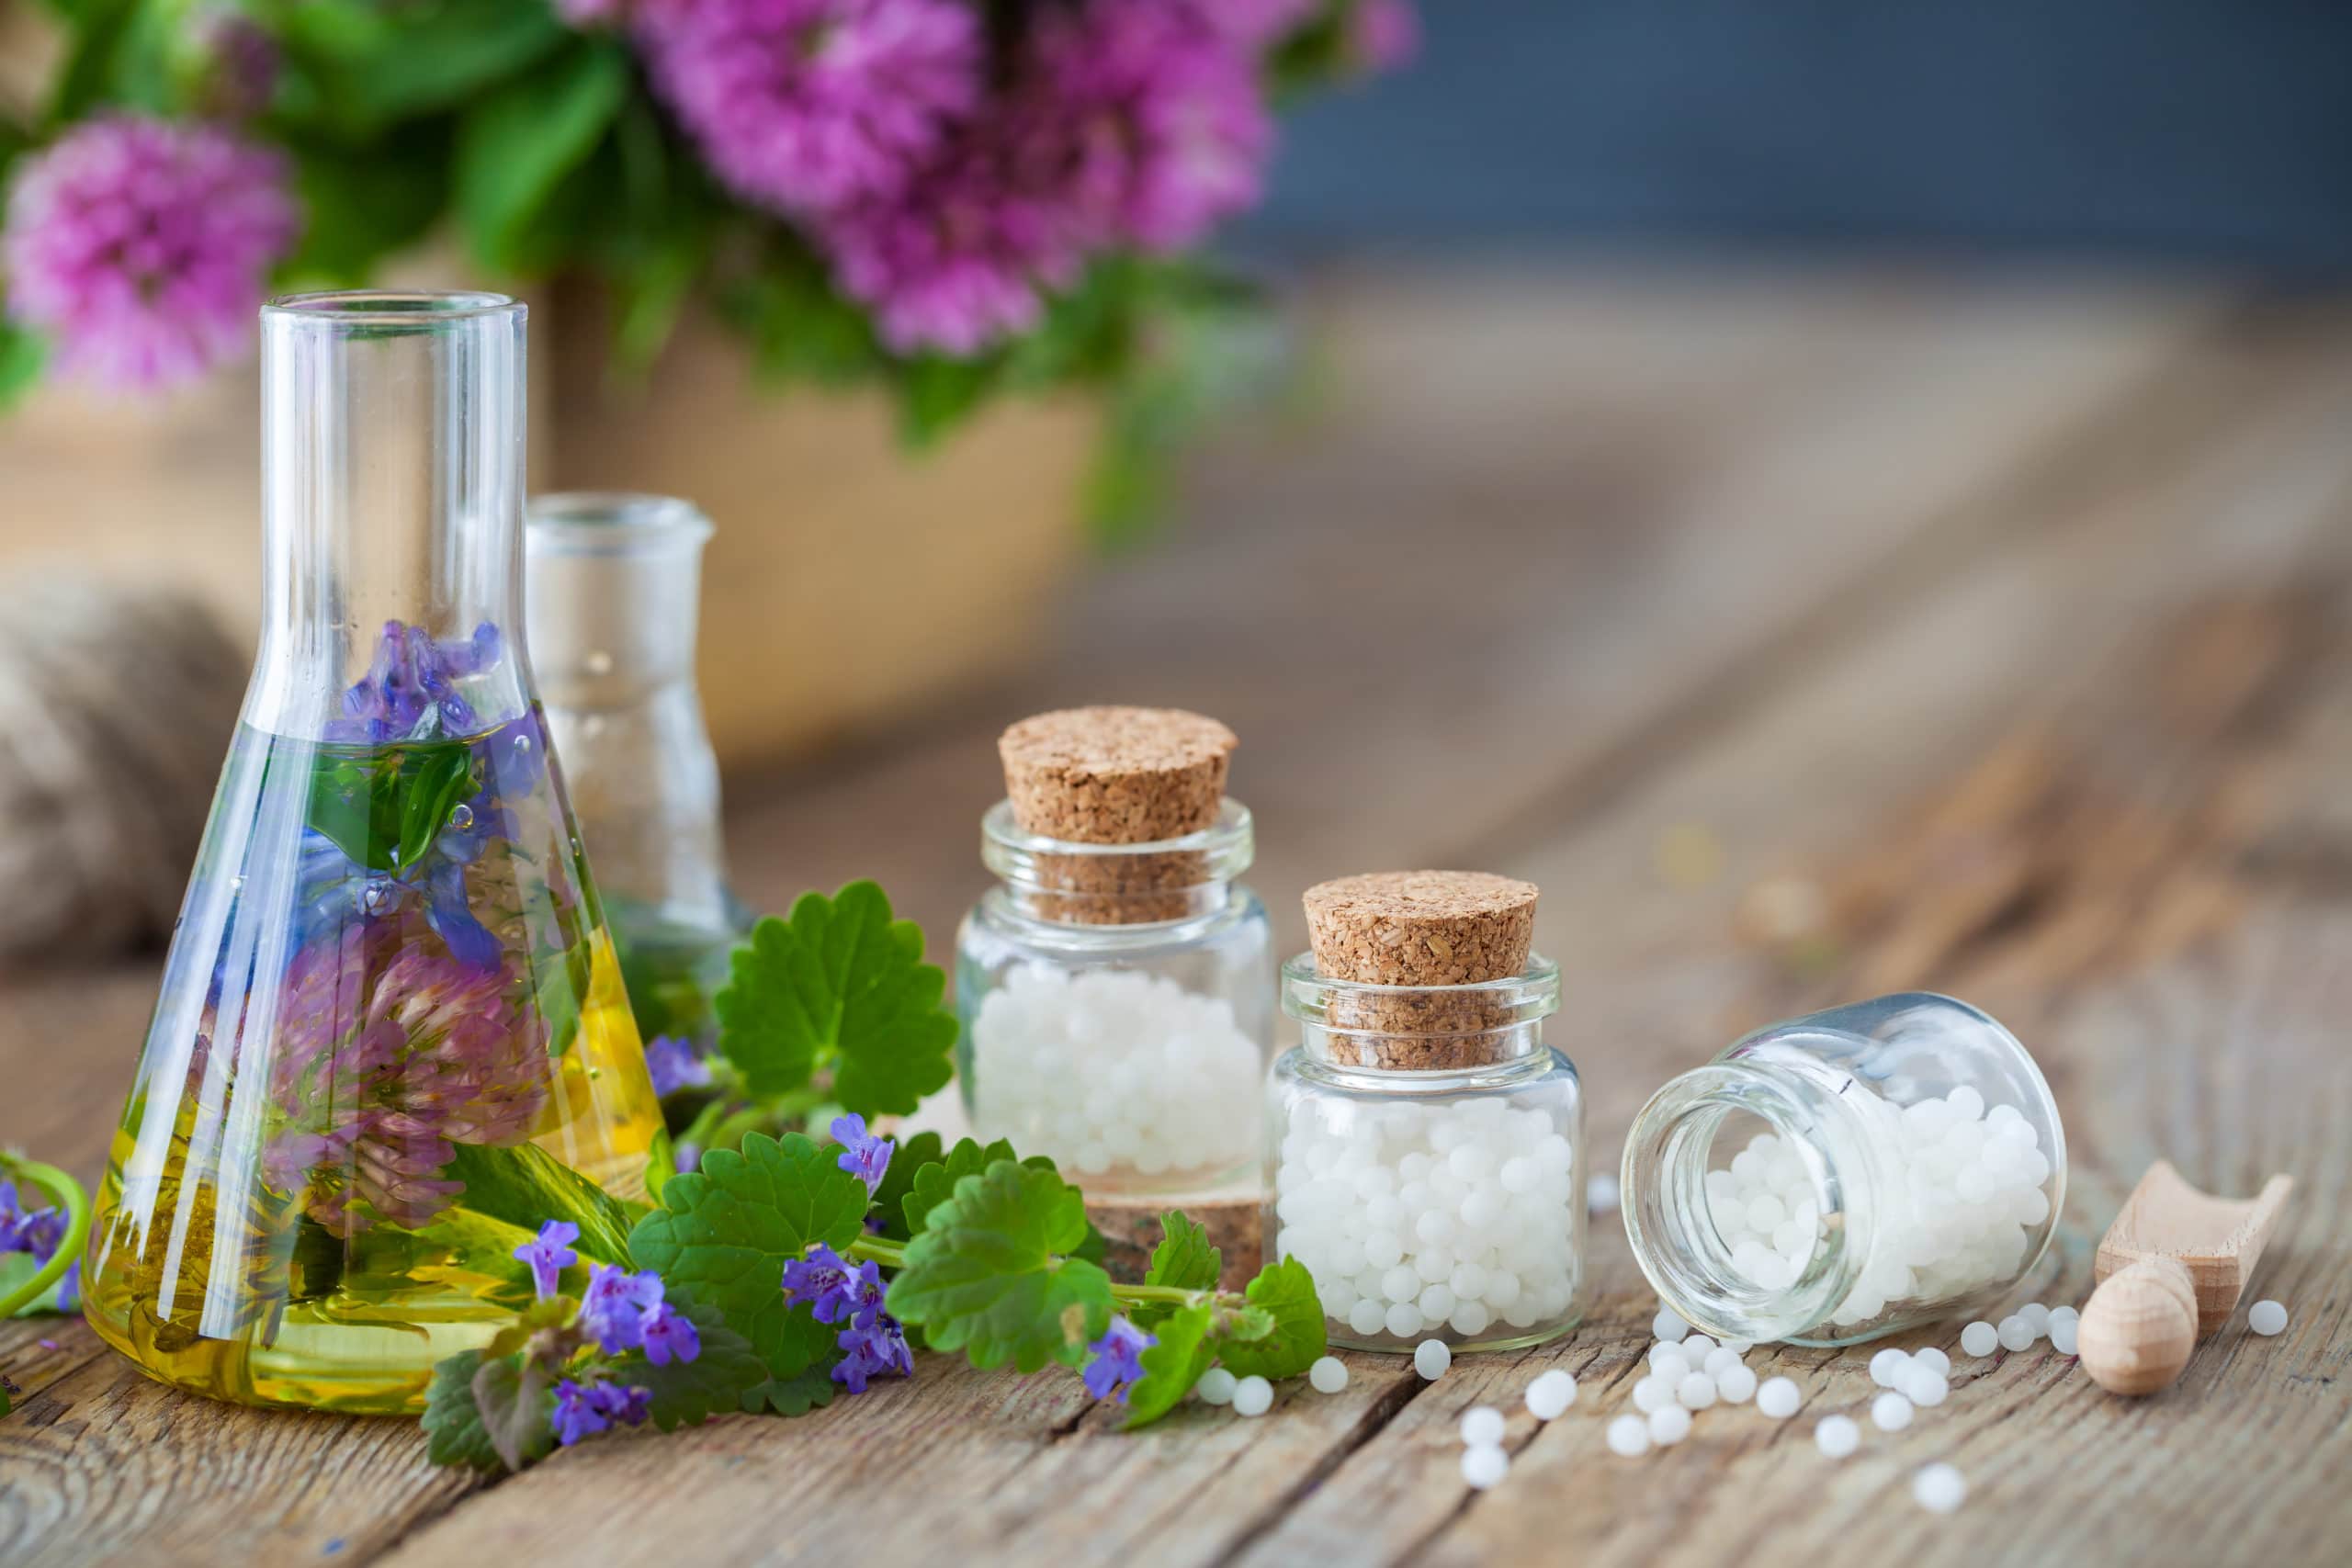 Is There Any Homeopathy Medicine To Stop Dialysis